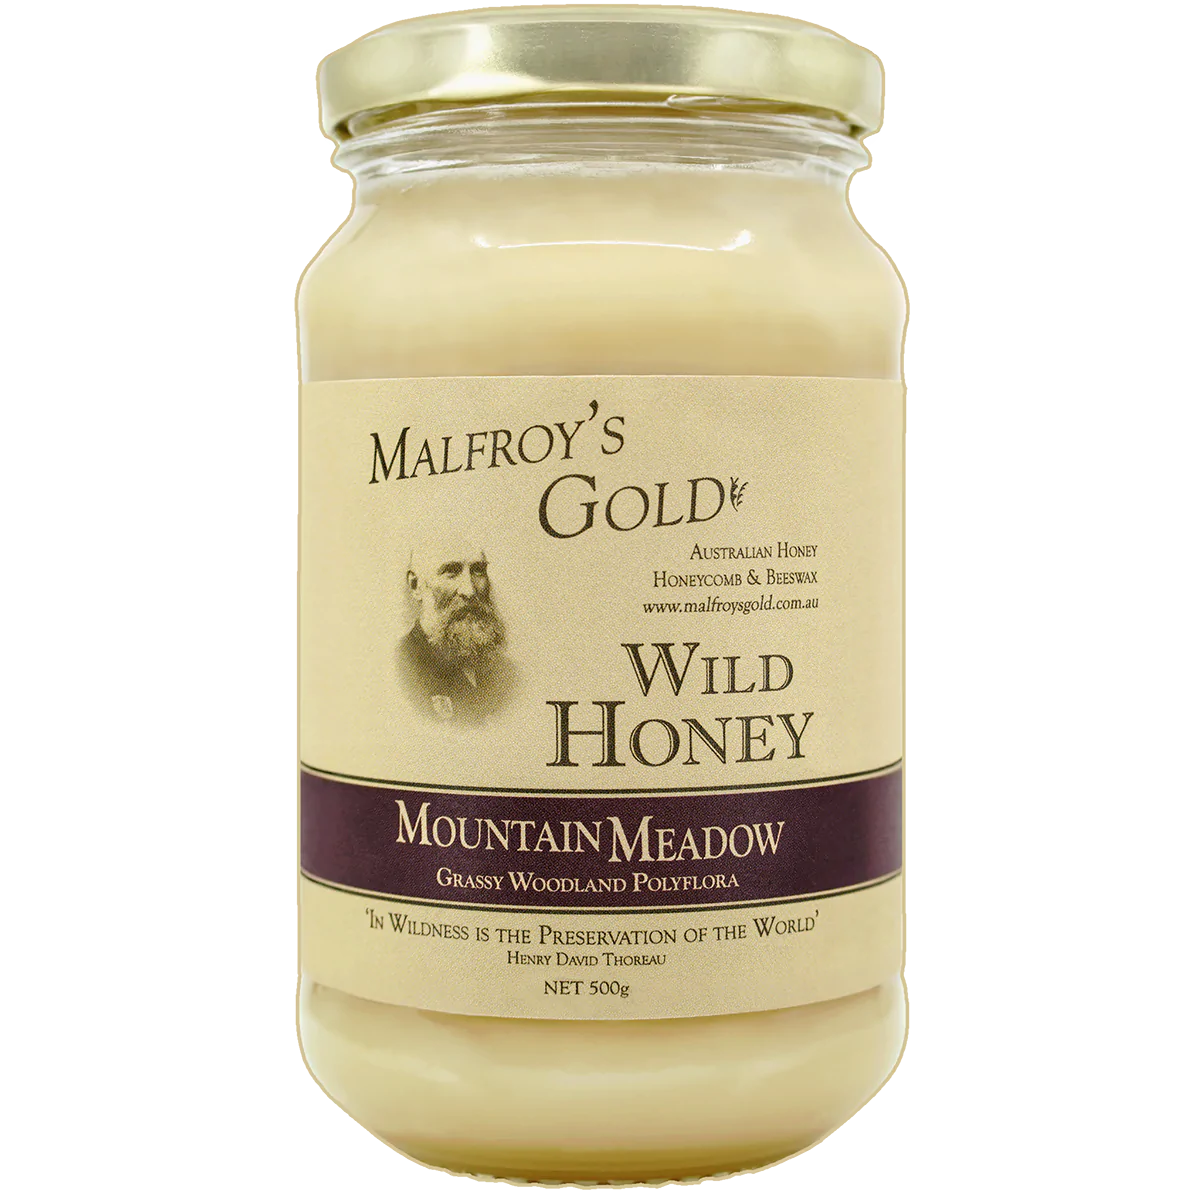 Malfroy's Gold 500g Wild Honey Mountain Meadow